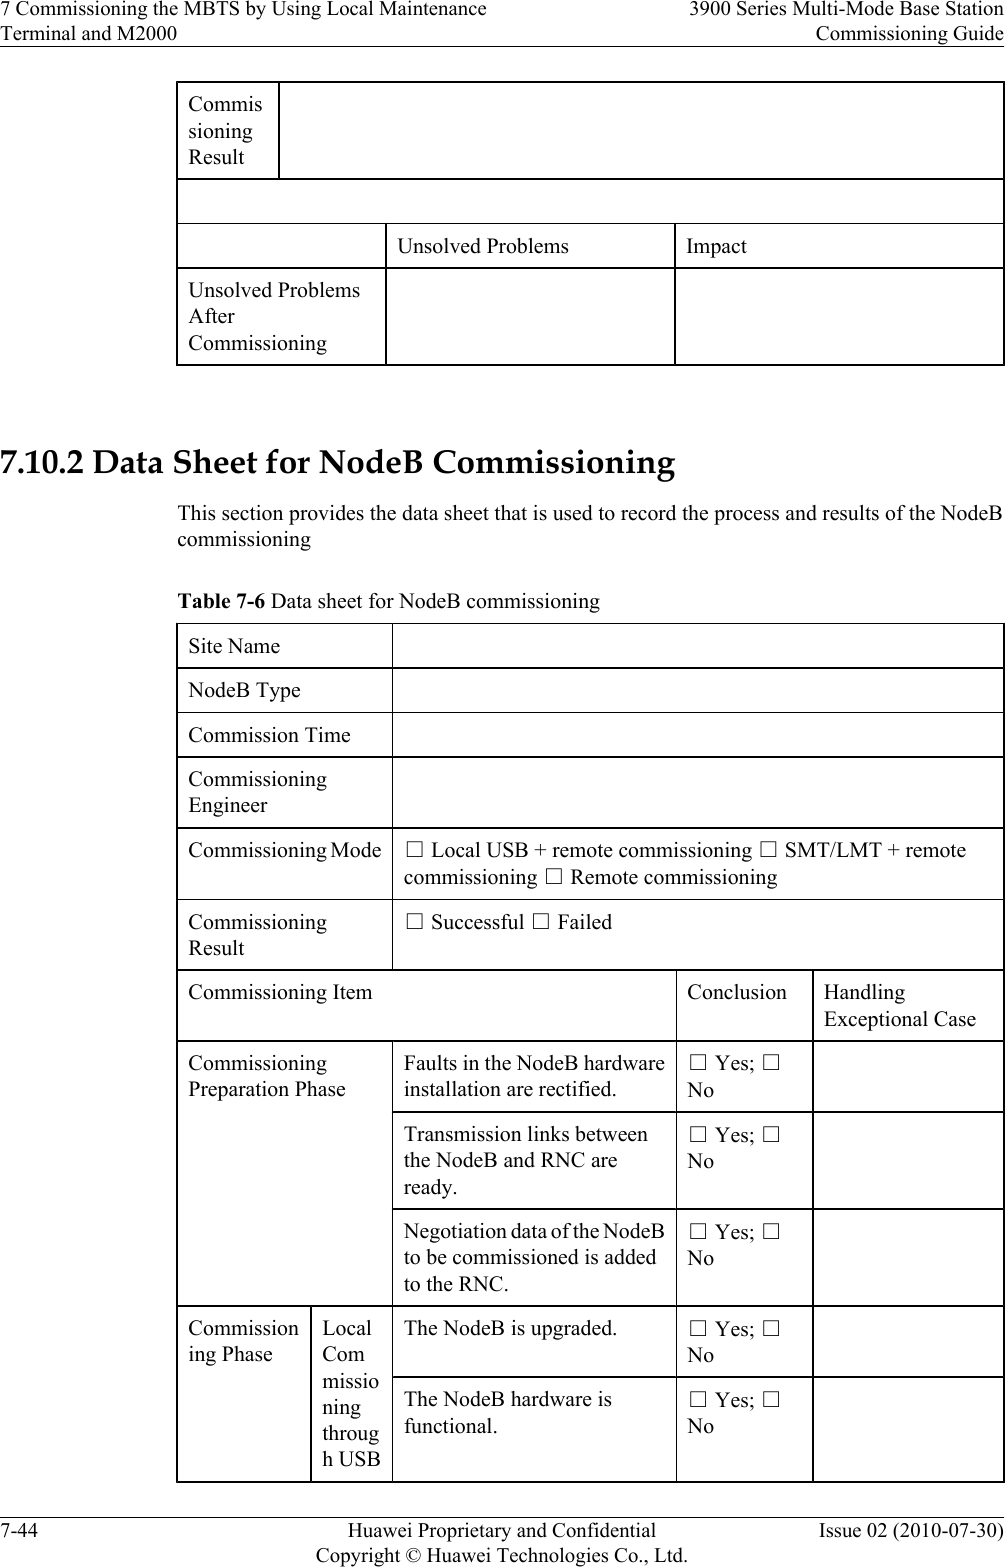 CommissioningResult    Unsolved Problems ImpactUnsolved ProblemsAfterCommissioning    7.10.2 Data Sheet for NodeB CommissioningThis section provides the data sheet that is used to record the process and results of the NodeBcommissioningTable 7-6 Data sheet for NodeB commissioningSite Name  NodeB Type  Commission Time  CommissioningEngineer Commissioning Mode □ Local USB + remote commissioning □ SMT/LMT + remotecommissioning □ Remote commissioningCommissioningResult□ Successful □ FailedCommissioning Item Conclusion HandlingExceptional CaseCommissioningPreparation PhaseFaults in the NodeB hardwareinstallation are rectified.□ Yes; □No Transmission links betweenthe NodeB and RNC areready.□ Yes; □No Negotiation data of the NodeBto be commissioned is addedto the RNC.□ Yes; □No Commissioning PhaseLocalCommissioningthrough USBThe NodeB is upgraded. □ Yes; □No The NodeB hardware isfunctional.□ Yes; □No 7 Commissioning the MBTS by Using Local MaintenanceTerminal and M20003900 Series Multi-Mode Base StationCommissioning Guide7-44 Huawei Proprietary and ConfidentialCopyright © Huawei Technologies Co., Ltd.Issue 02 (2010-07-30)